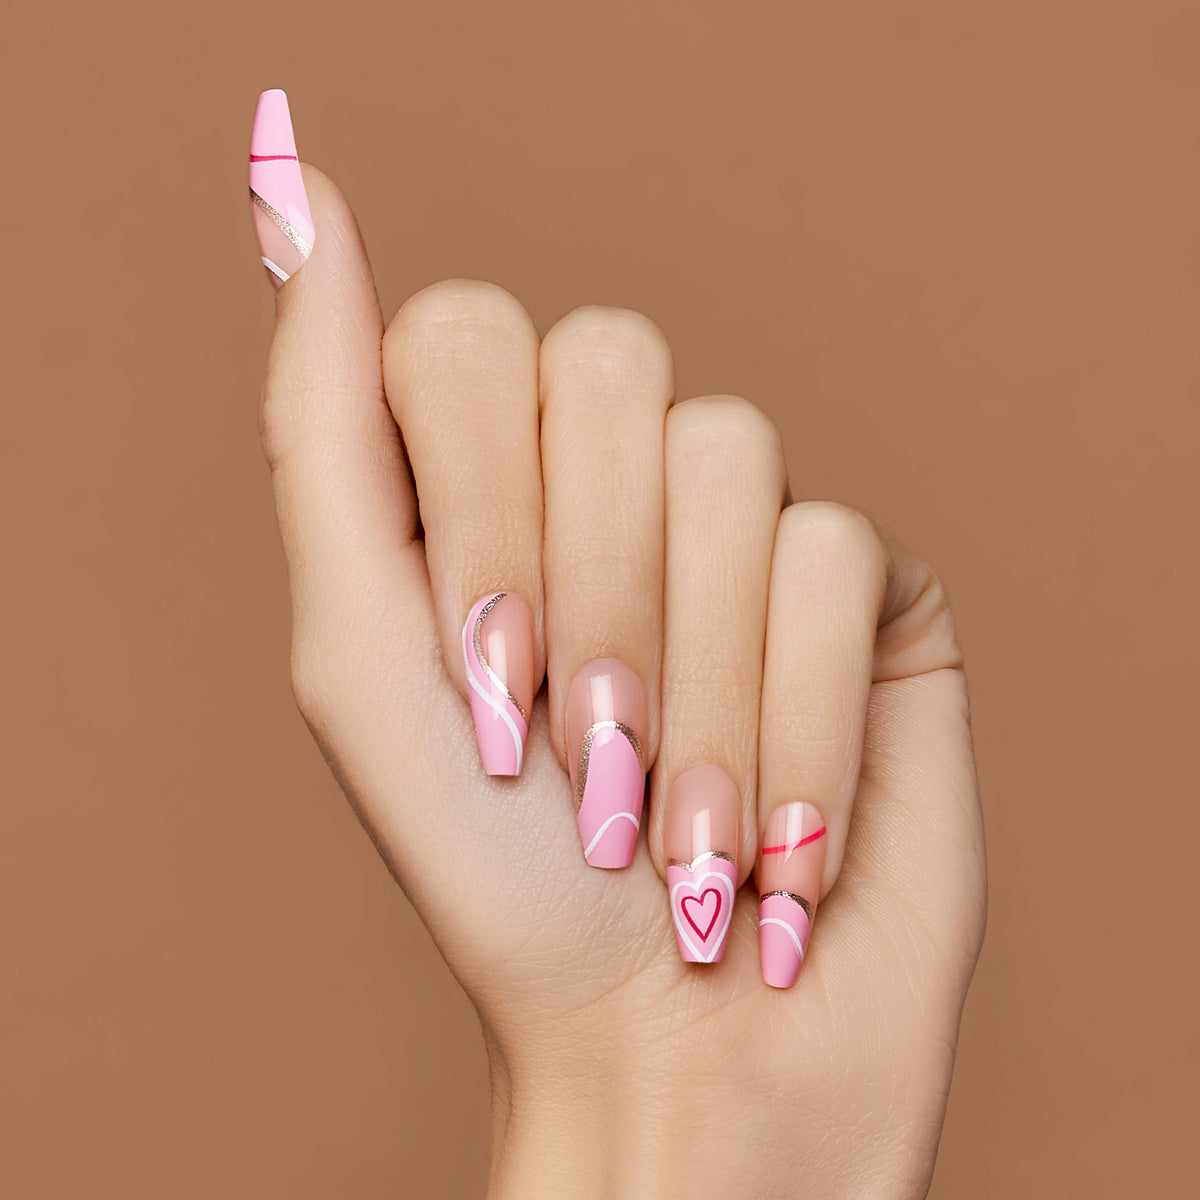 Artificial Nails 101: Acrylic, Gel and Silk